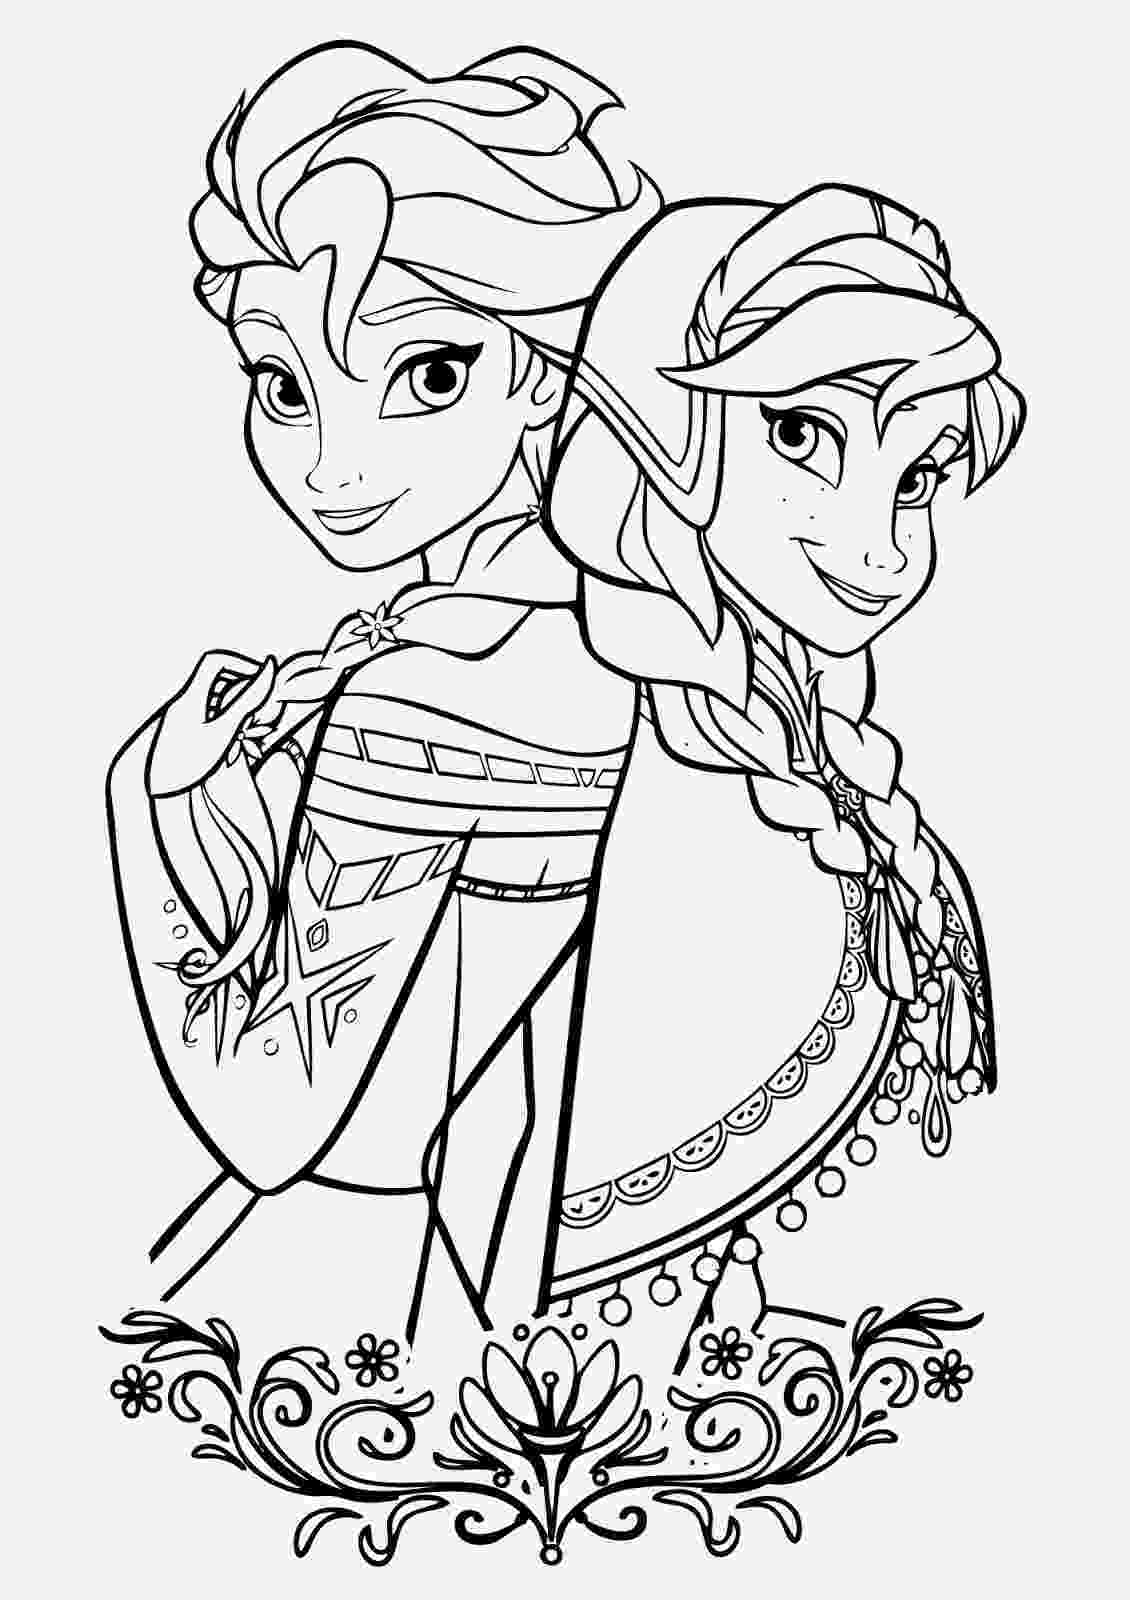 frozen printables coloring pages printable frozen coloring pages only coloring pages coloring frozen printables pages 